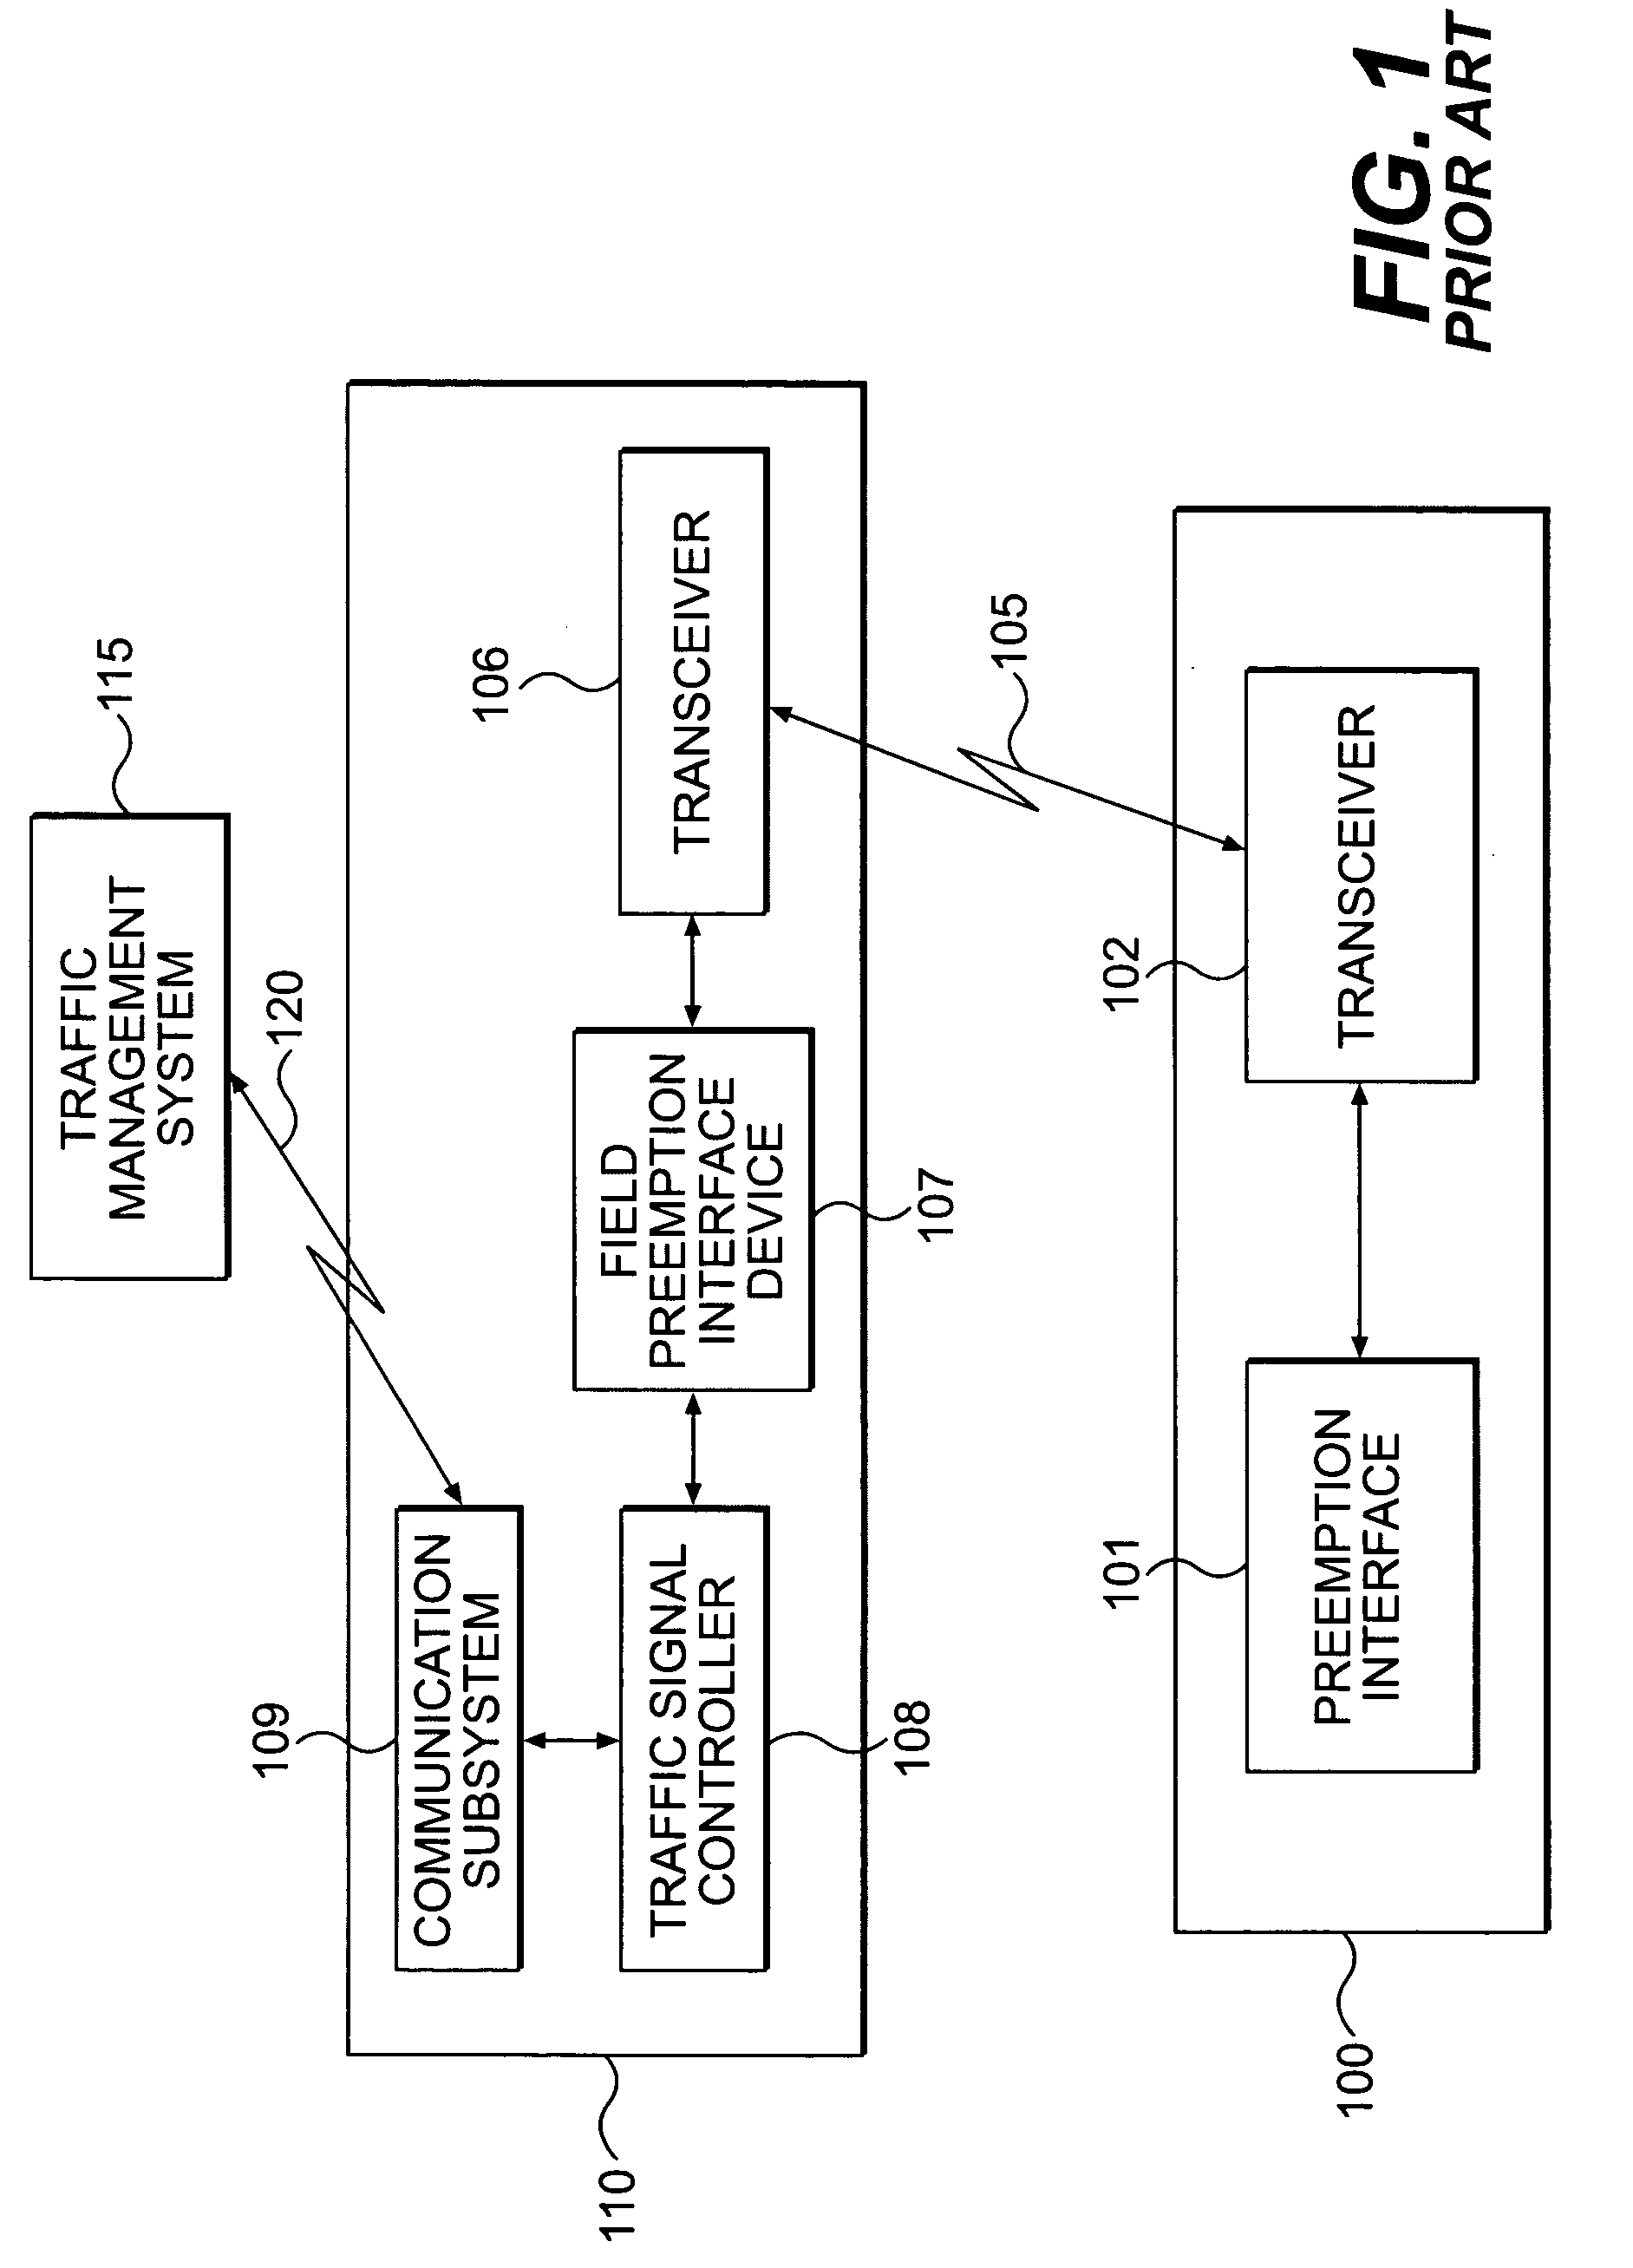 Centralized traffic signal preemption system and method of use